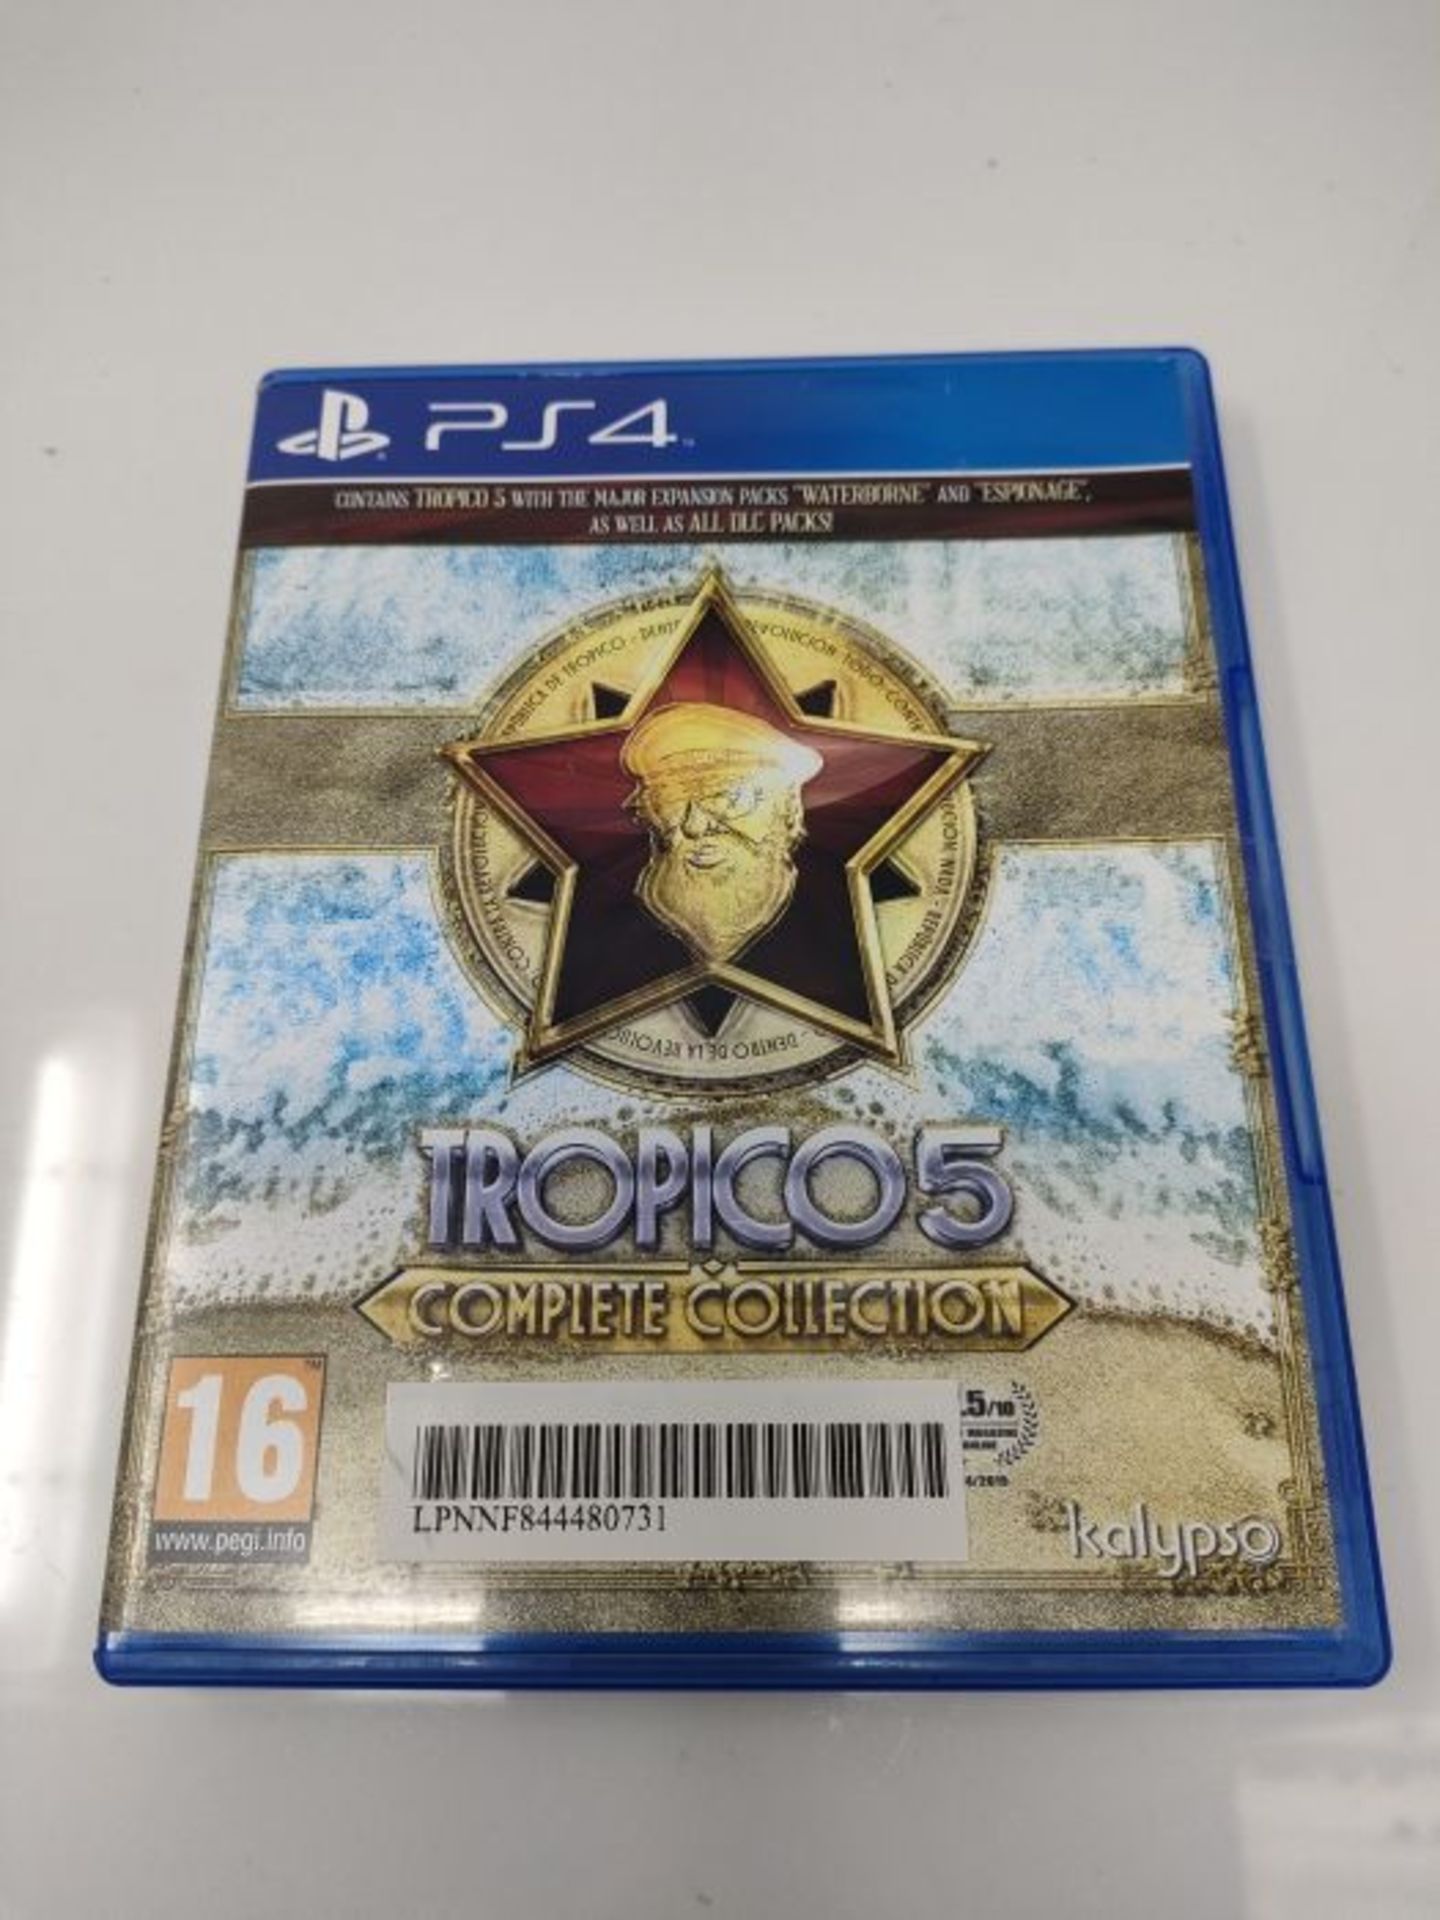 Tropico 5 - Complete Collection (PS4) - Image 2 of 3